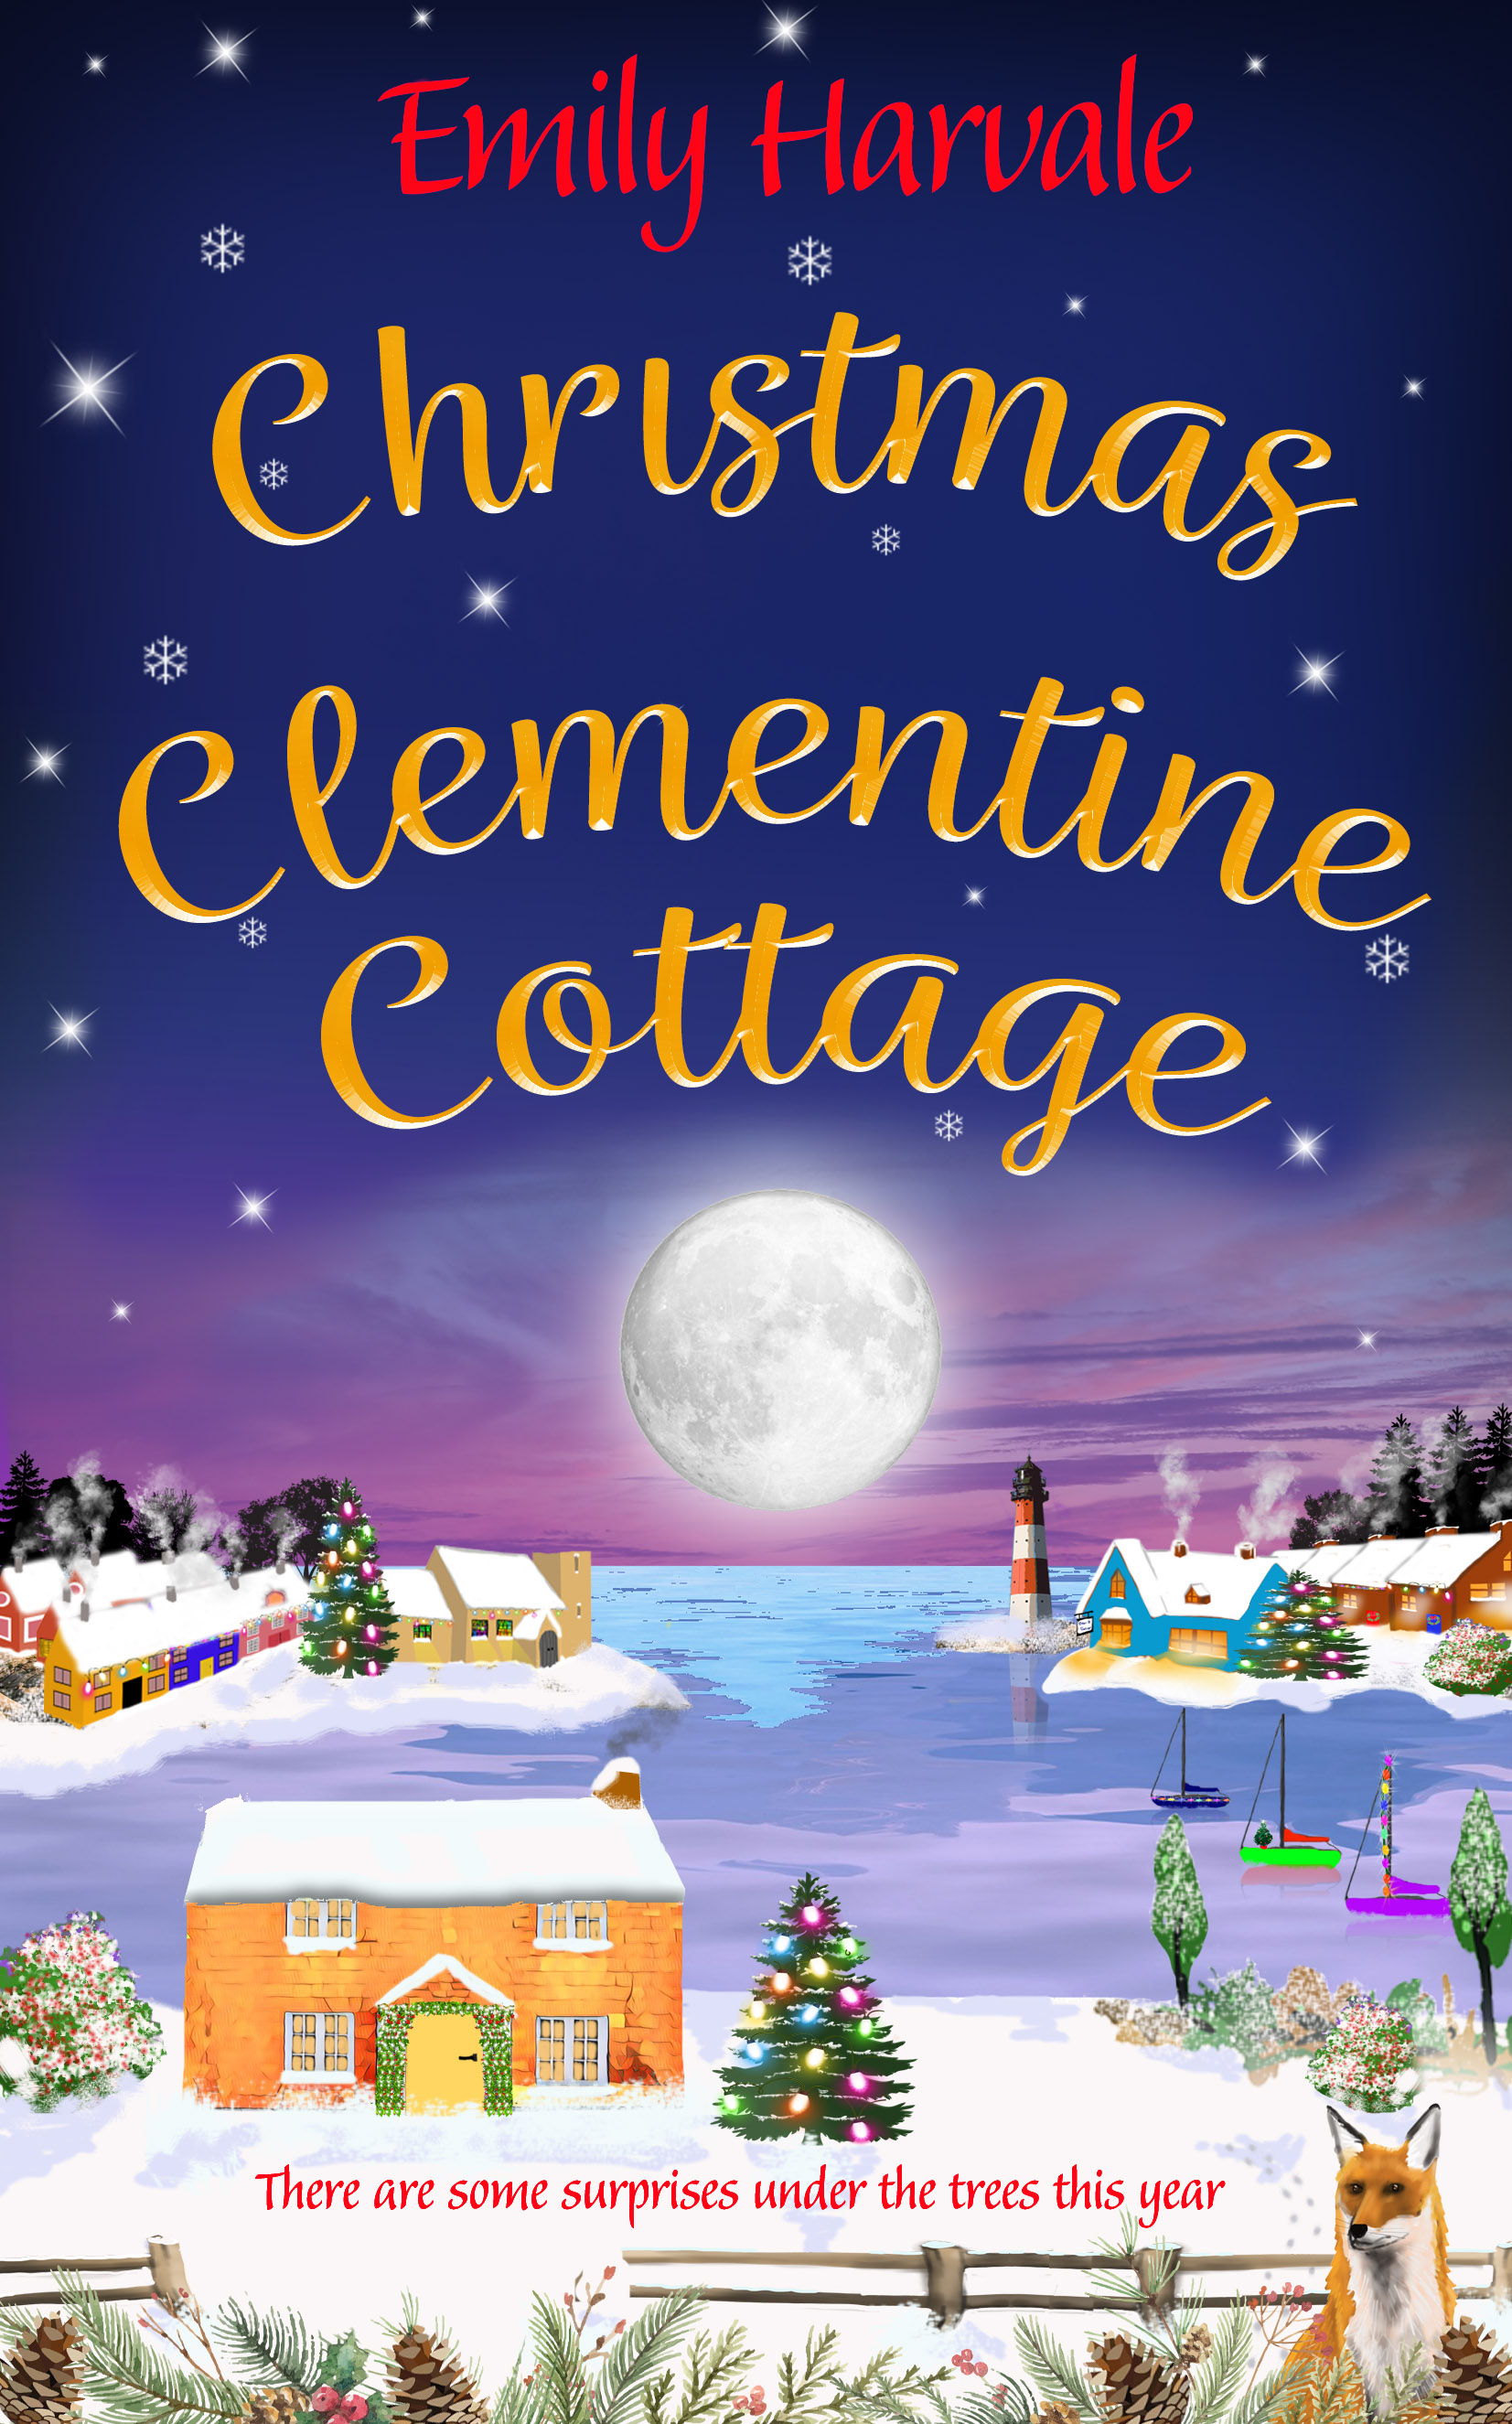 Christmas at Clementine Cottage